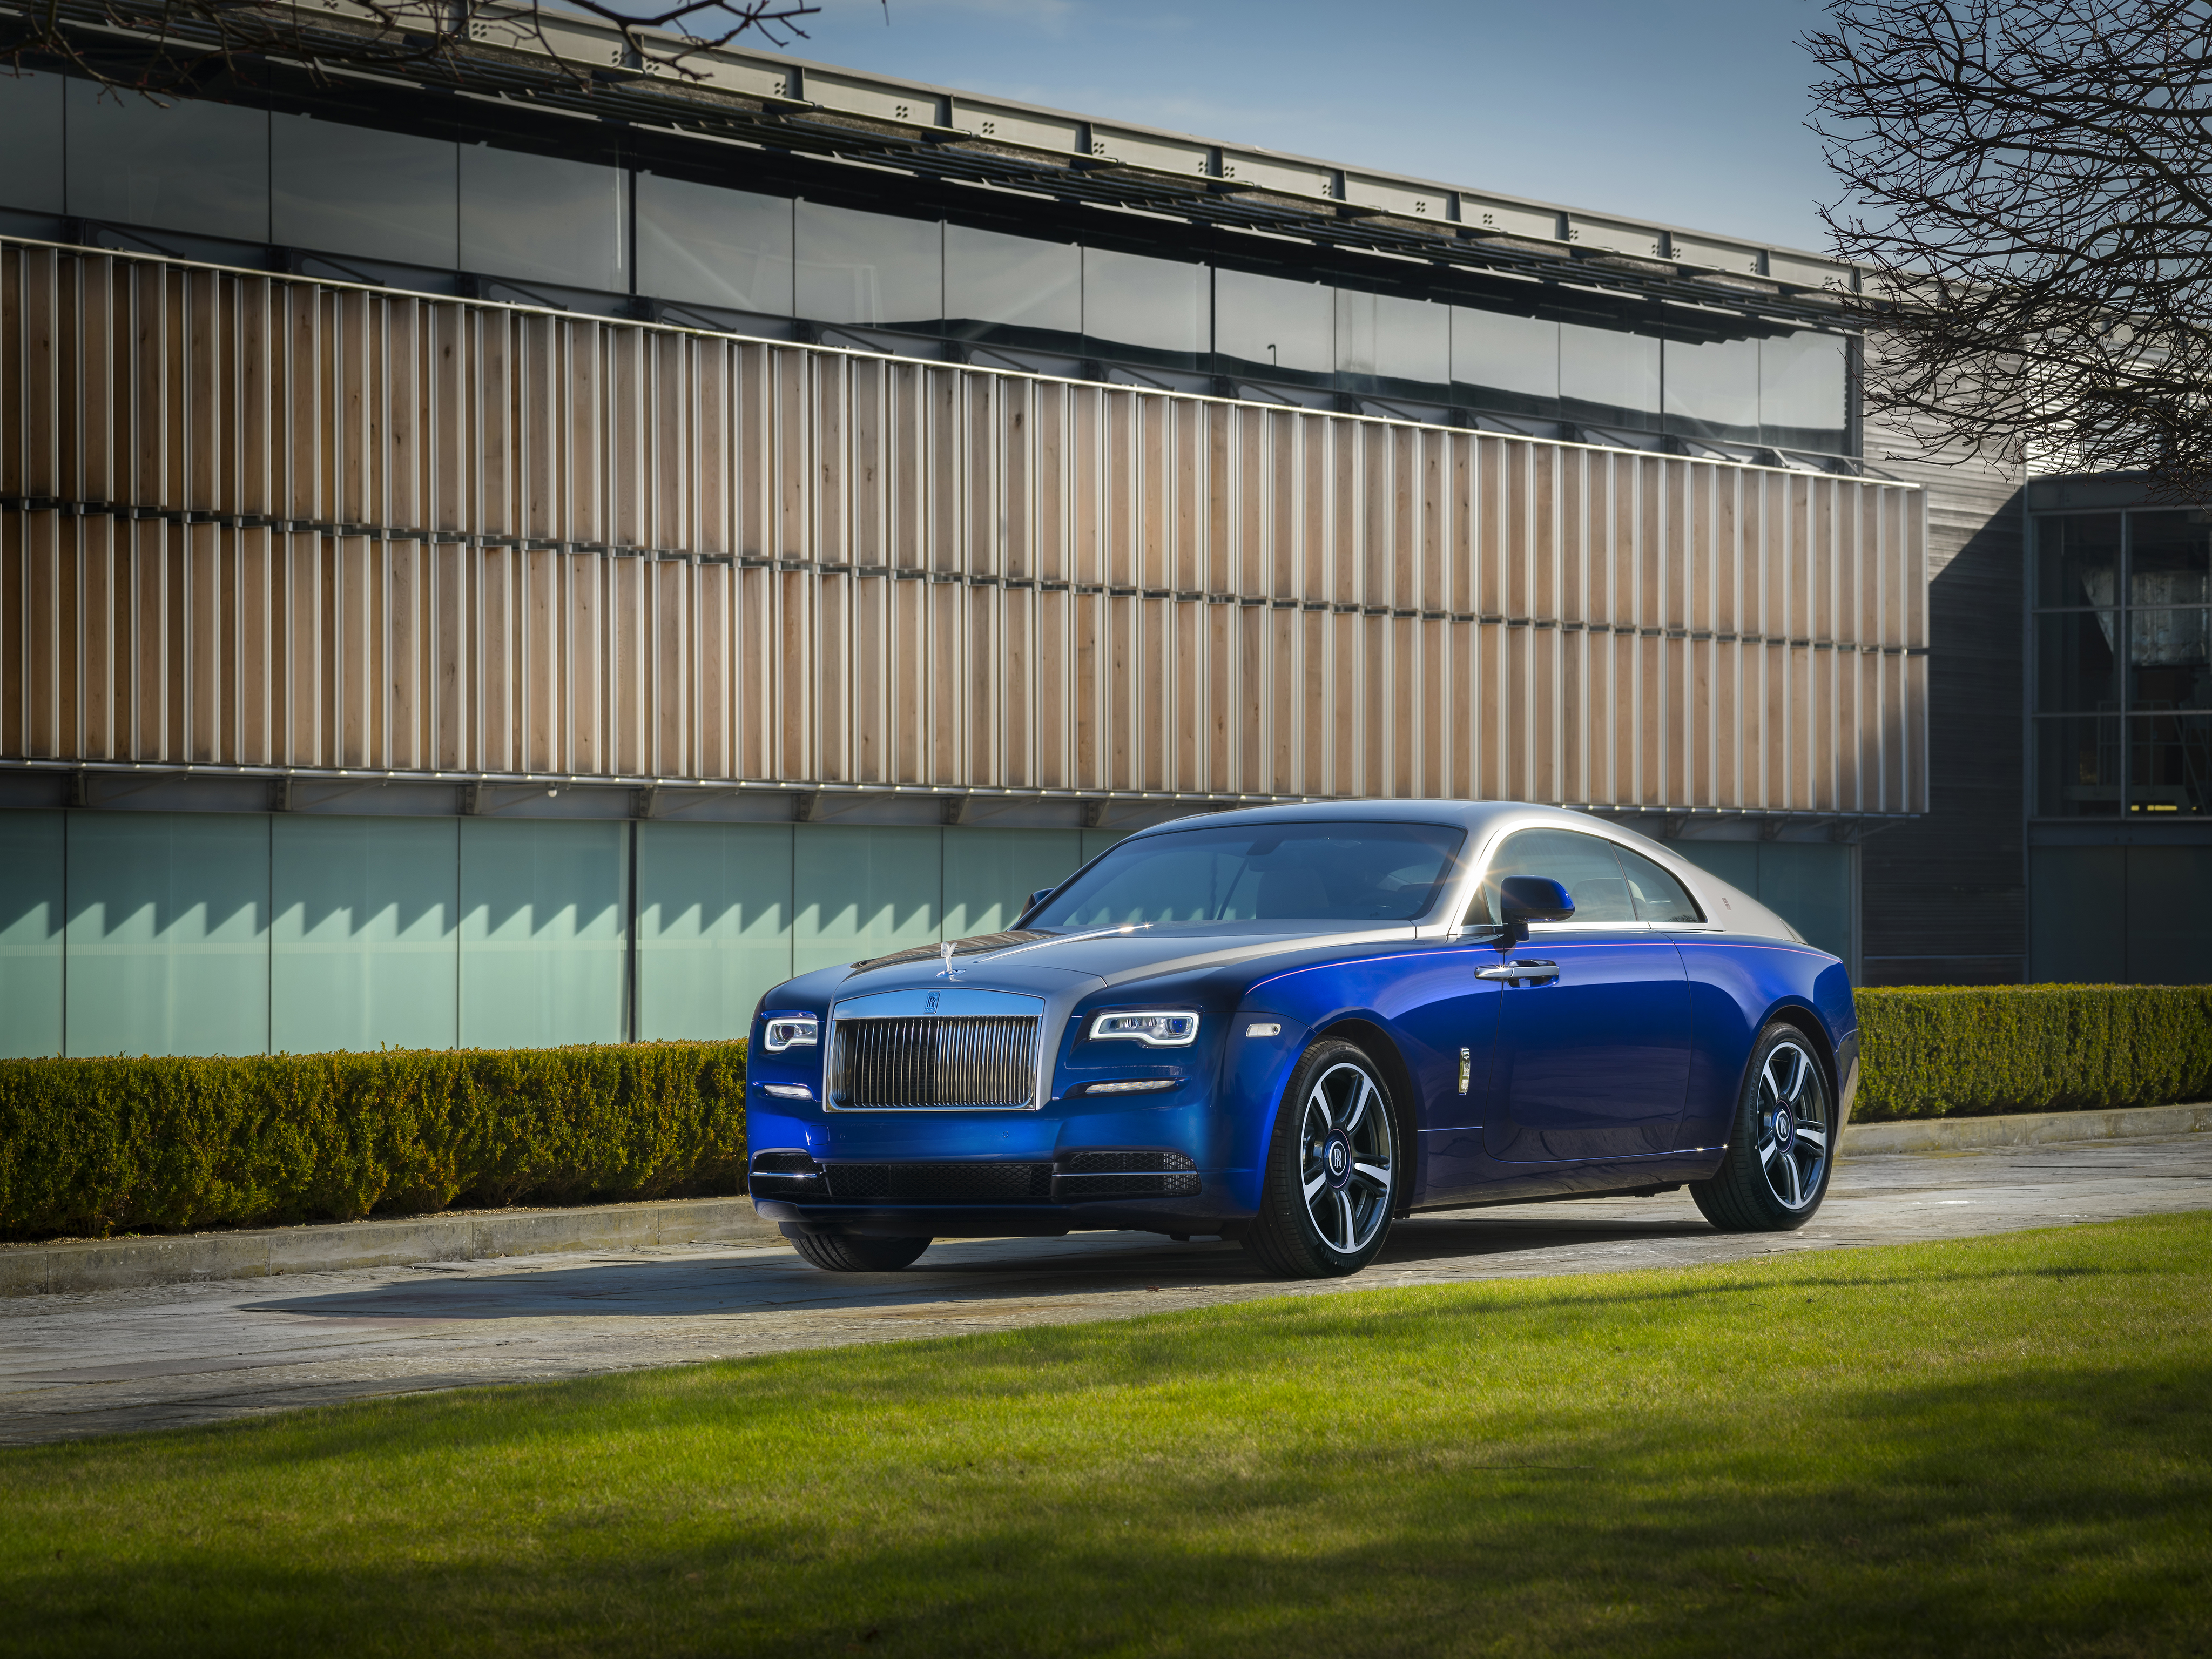 60+ Rolls-Royce Wraith HD Wallpapers and Backgrounds